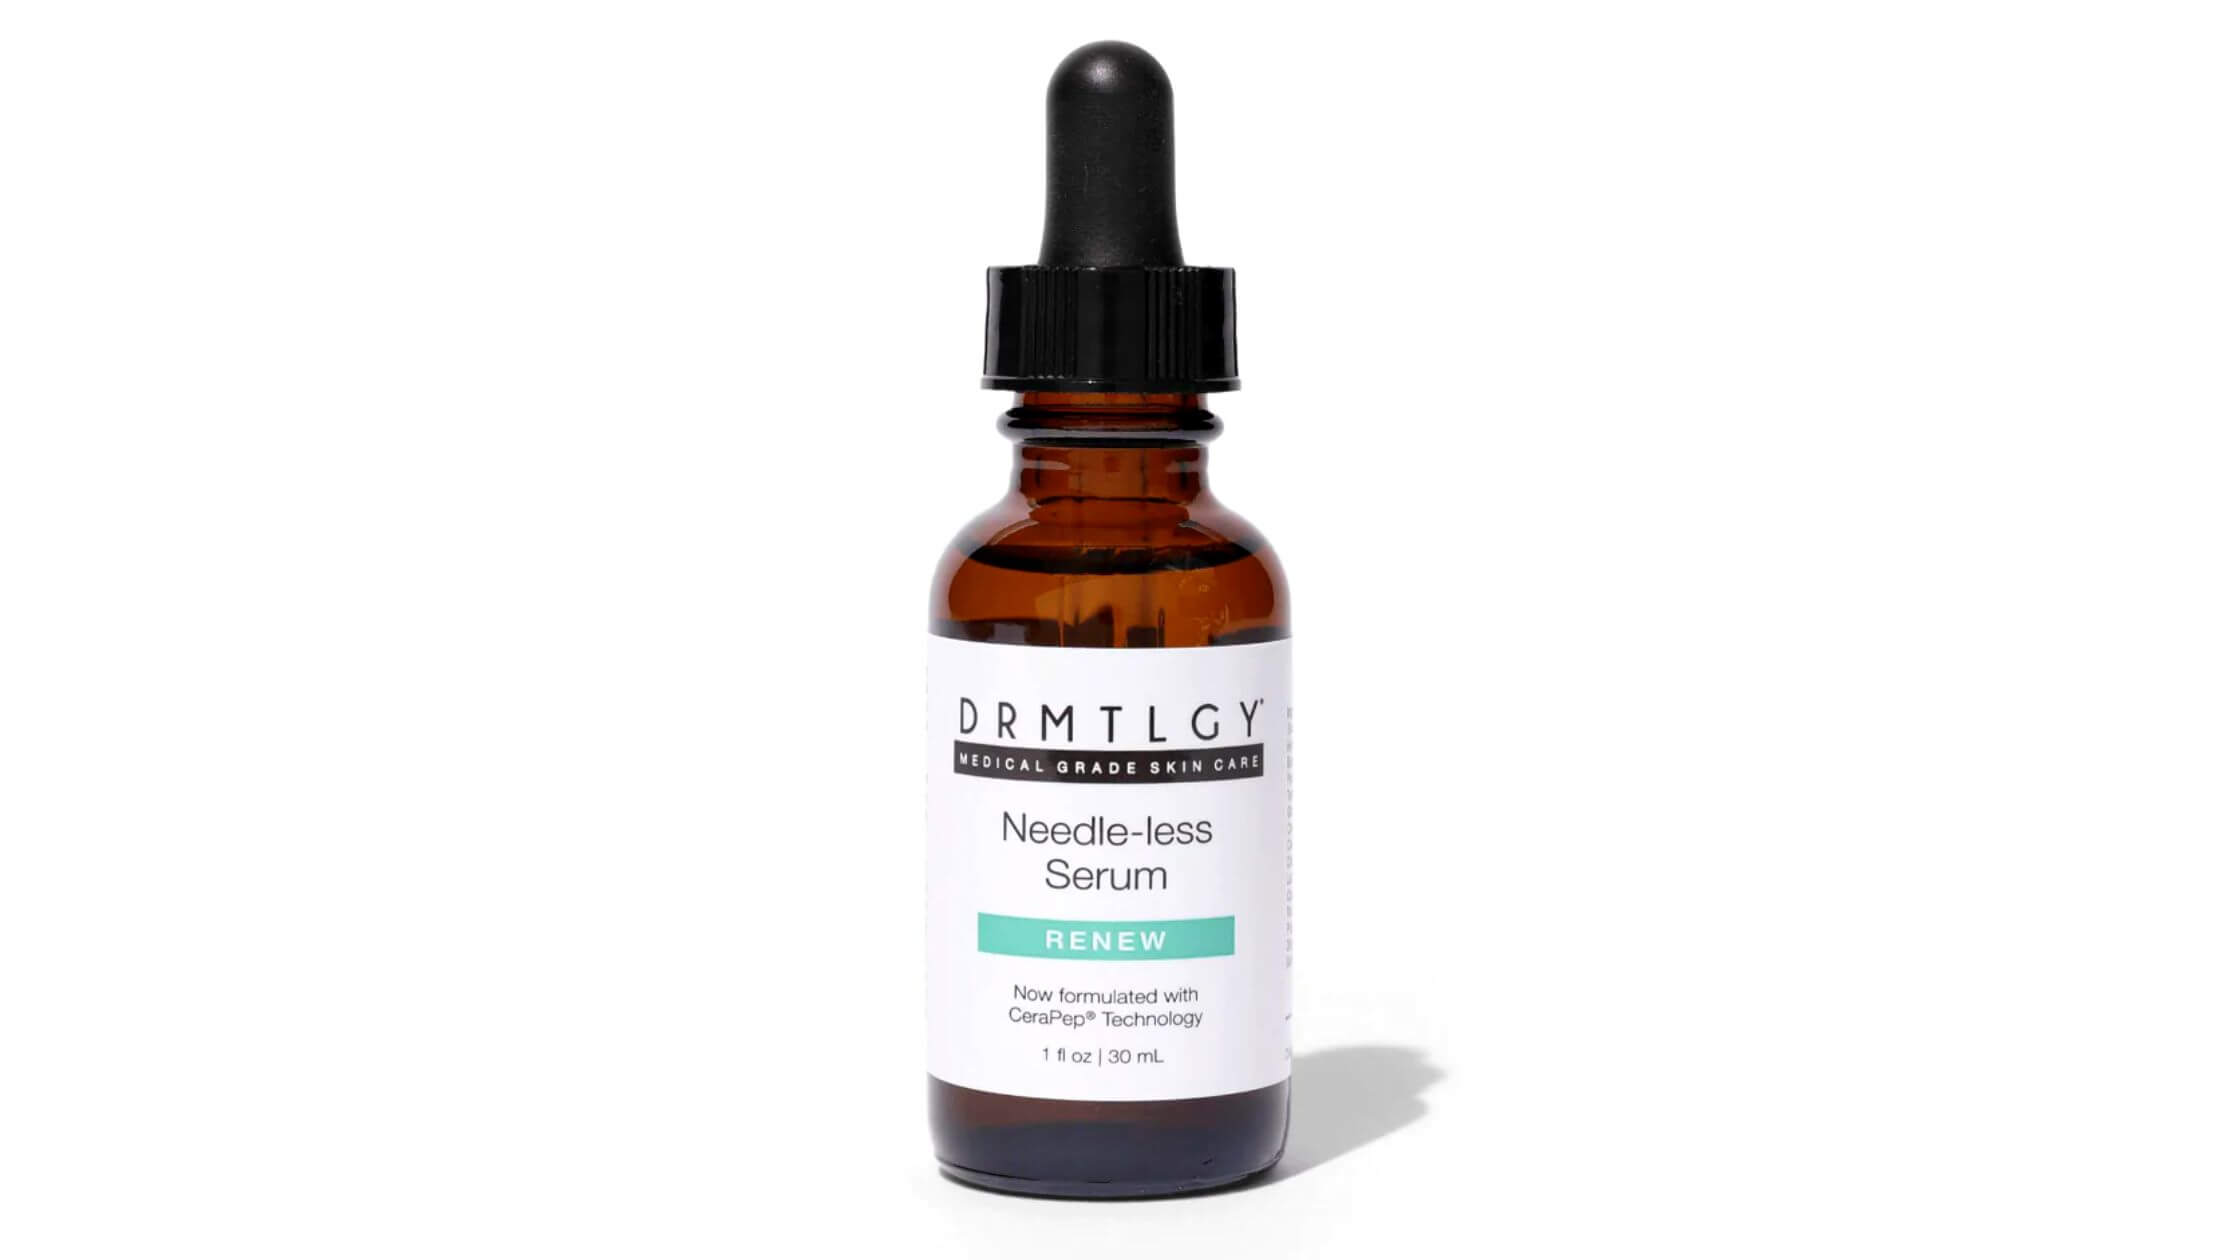 Drmtlgy Needle-Less Serum Review